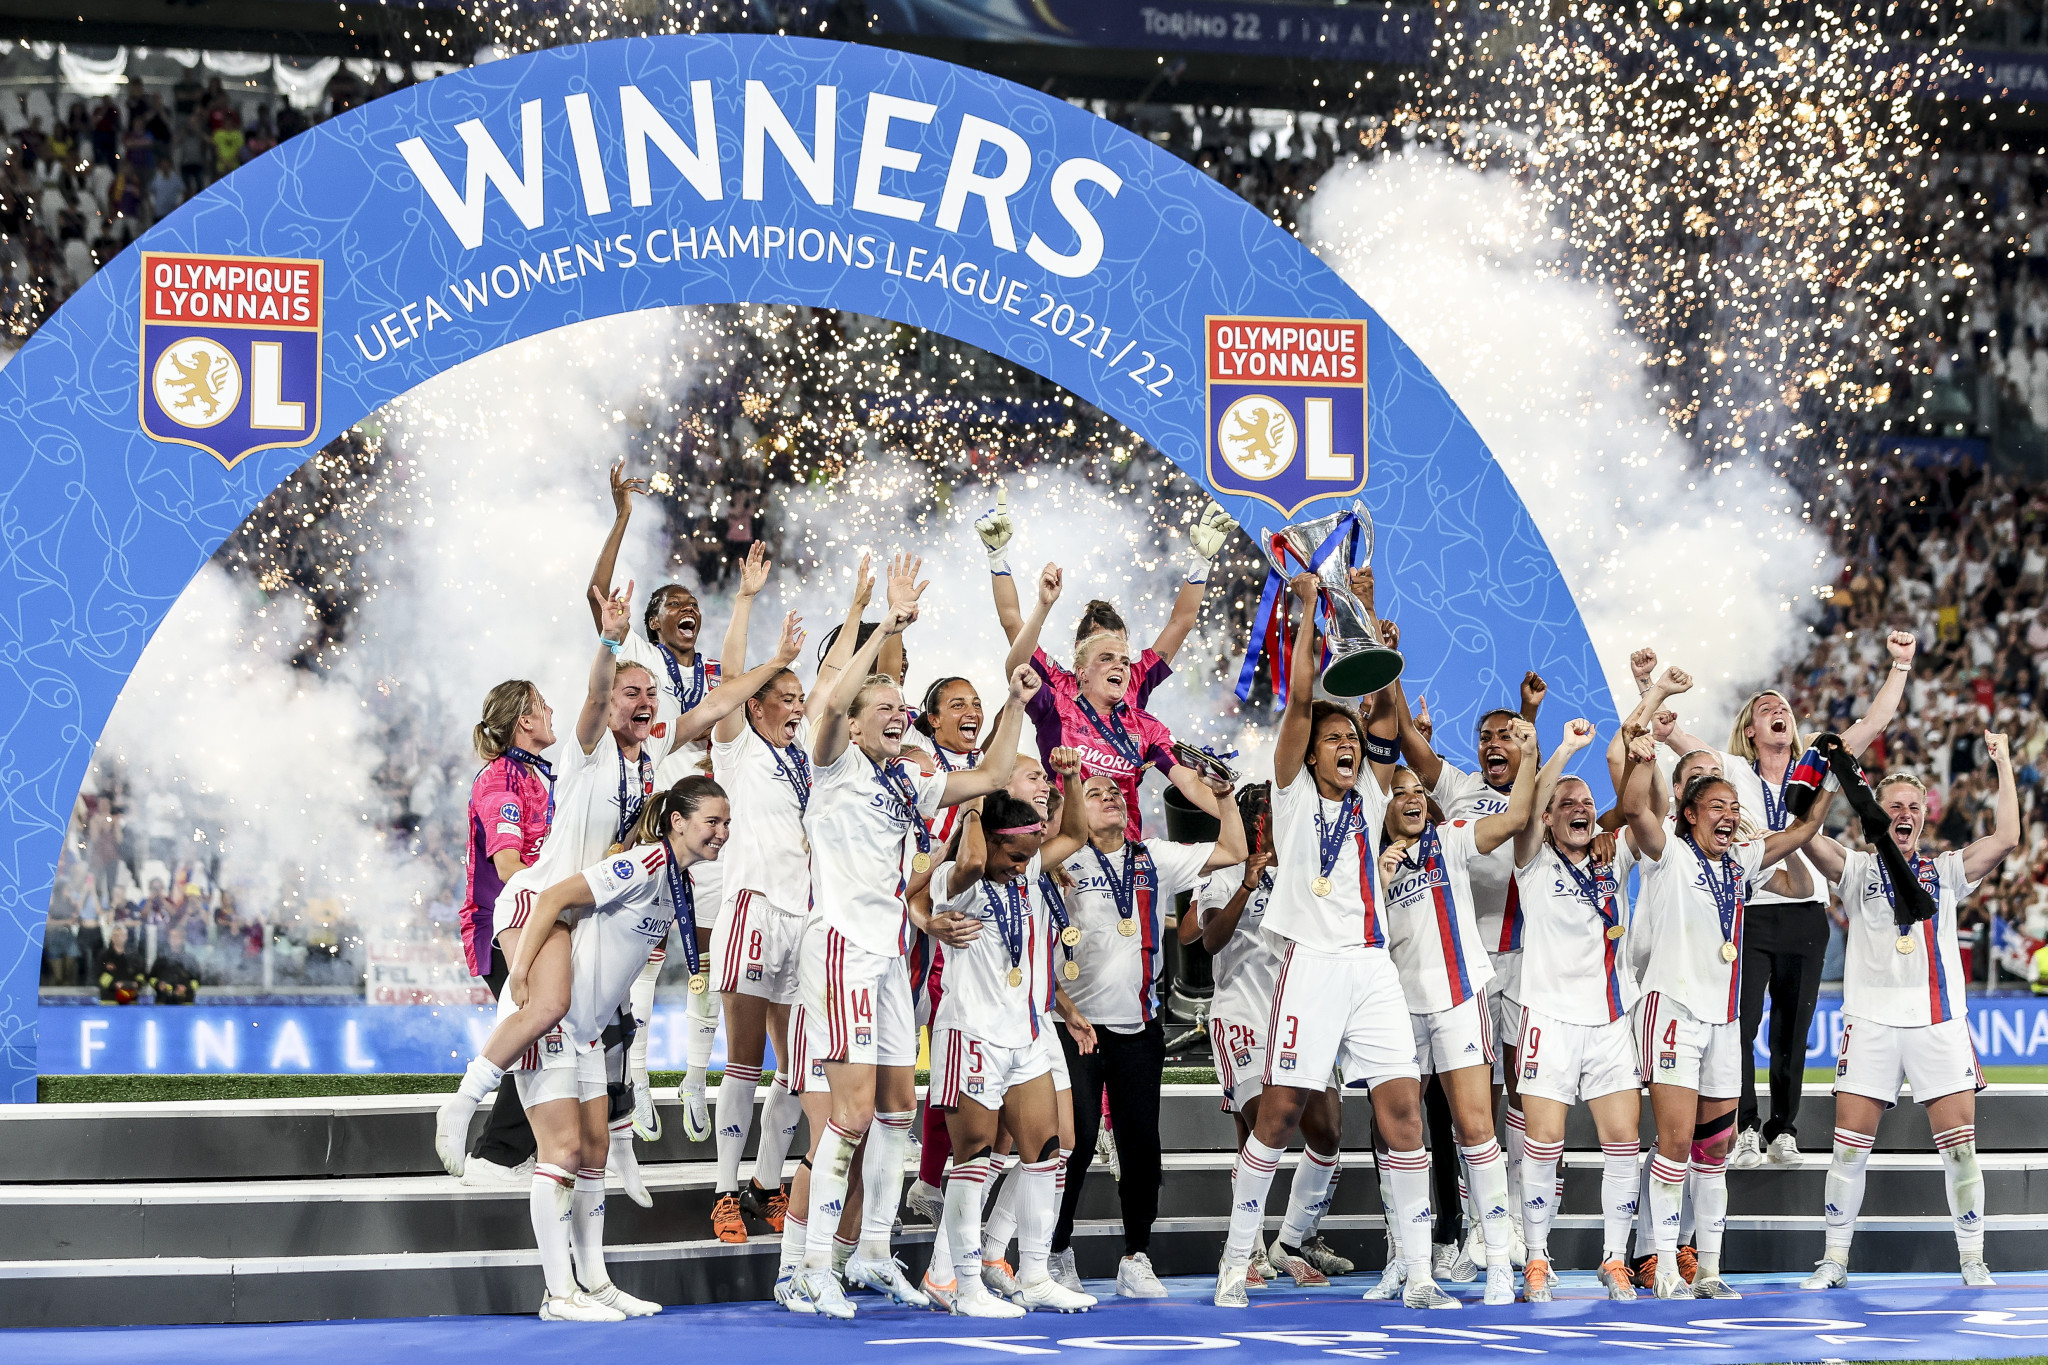 UEFA sets out strategy to grow game as it publishes Business Case for Women’s Football report